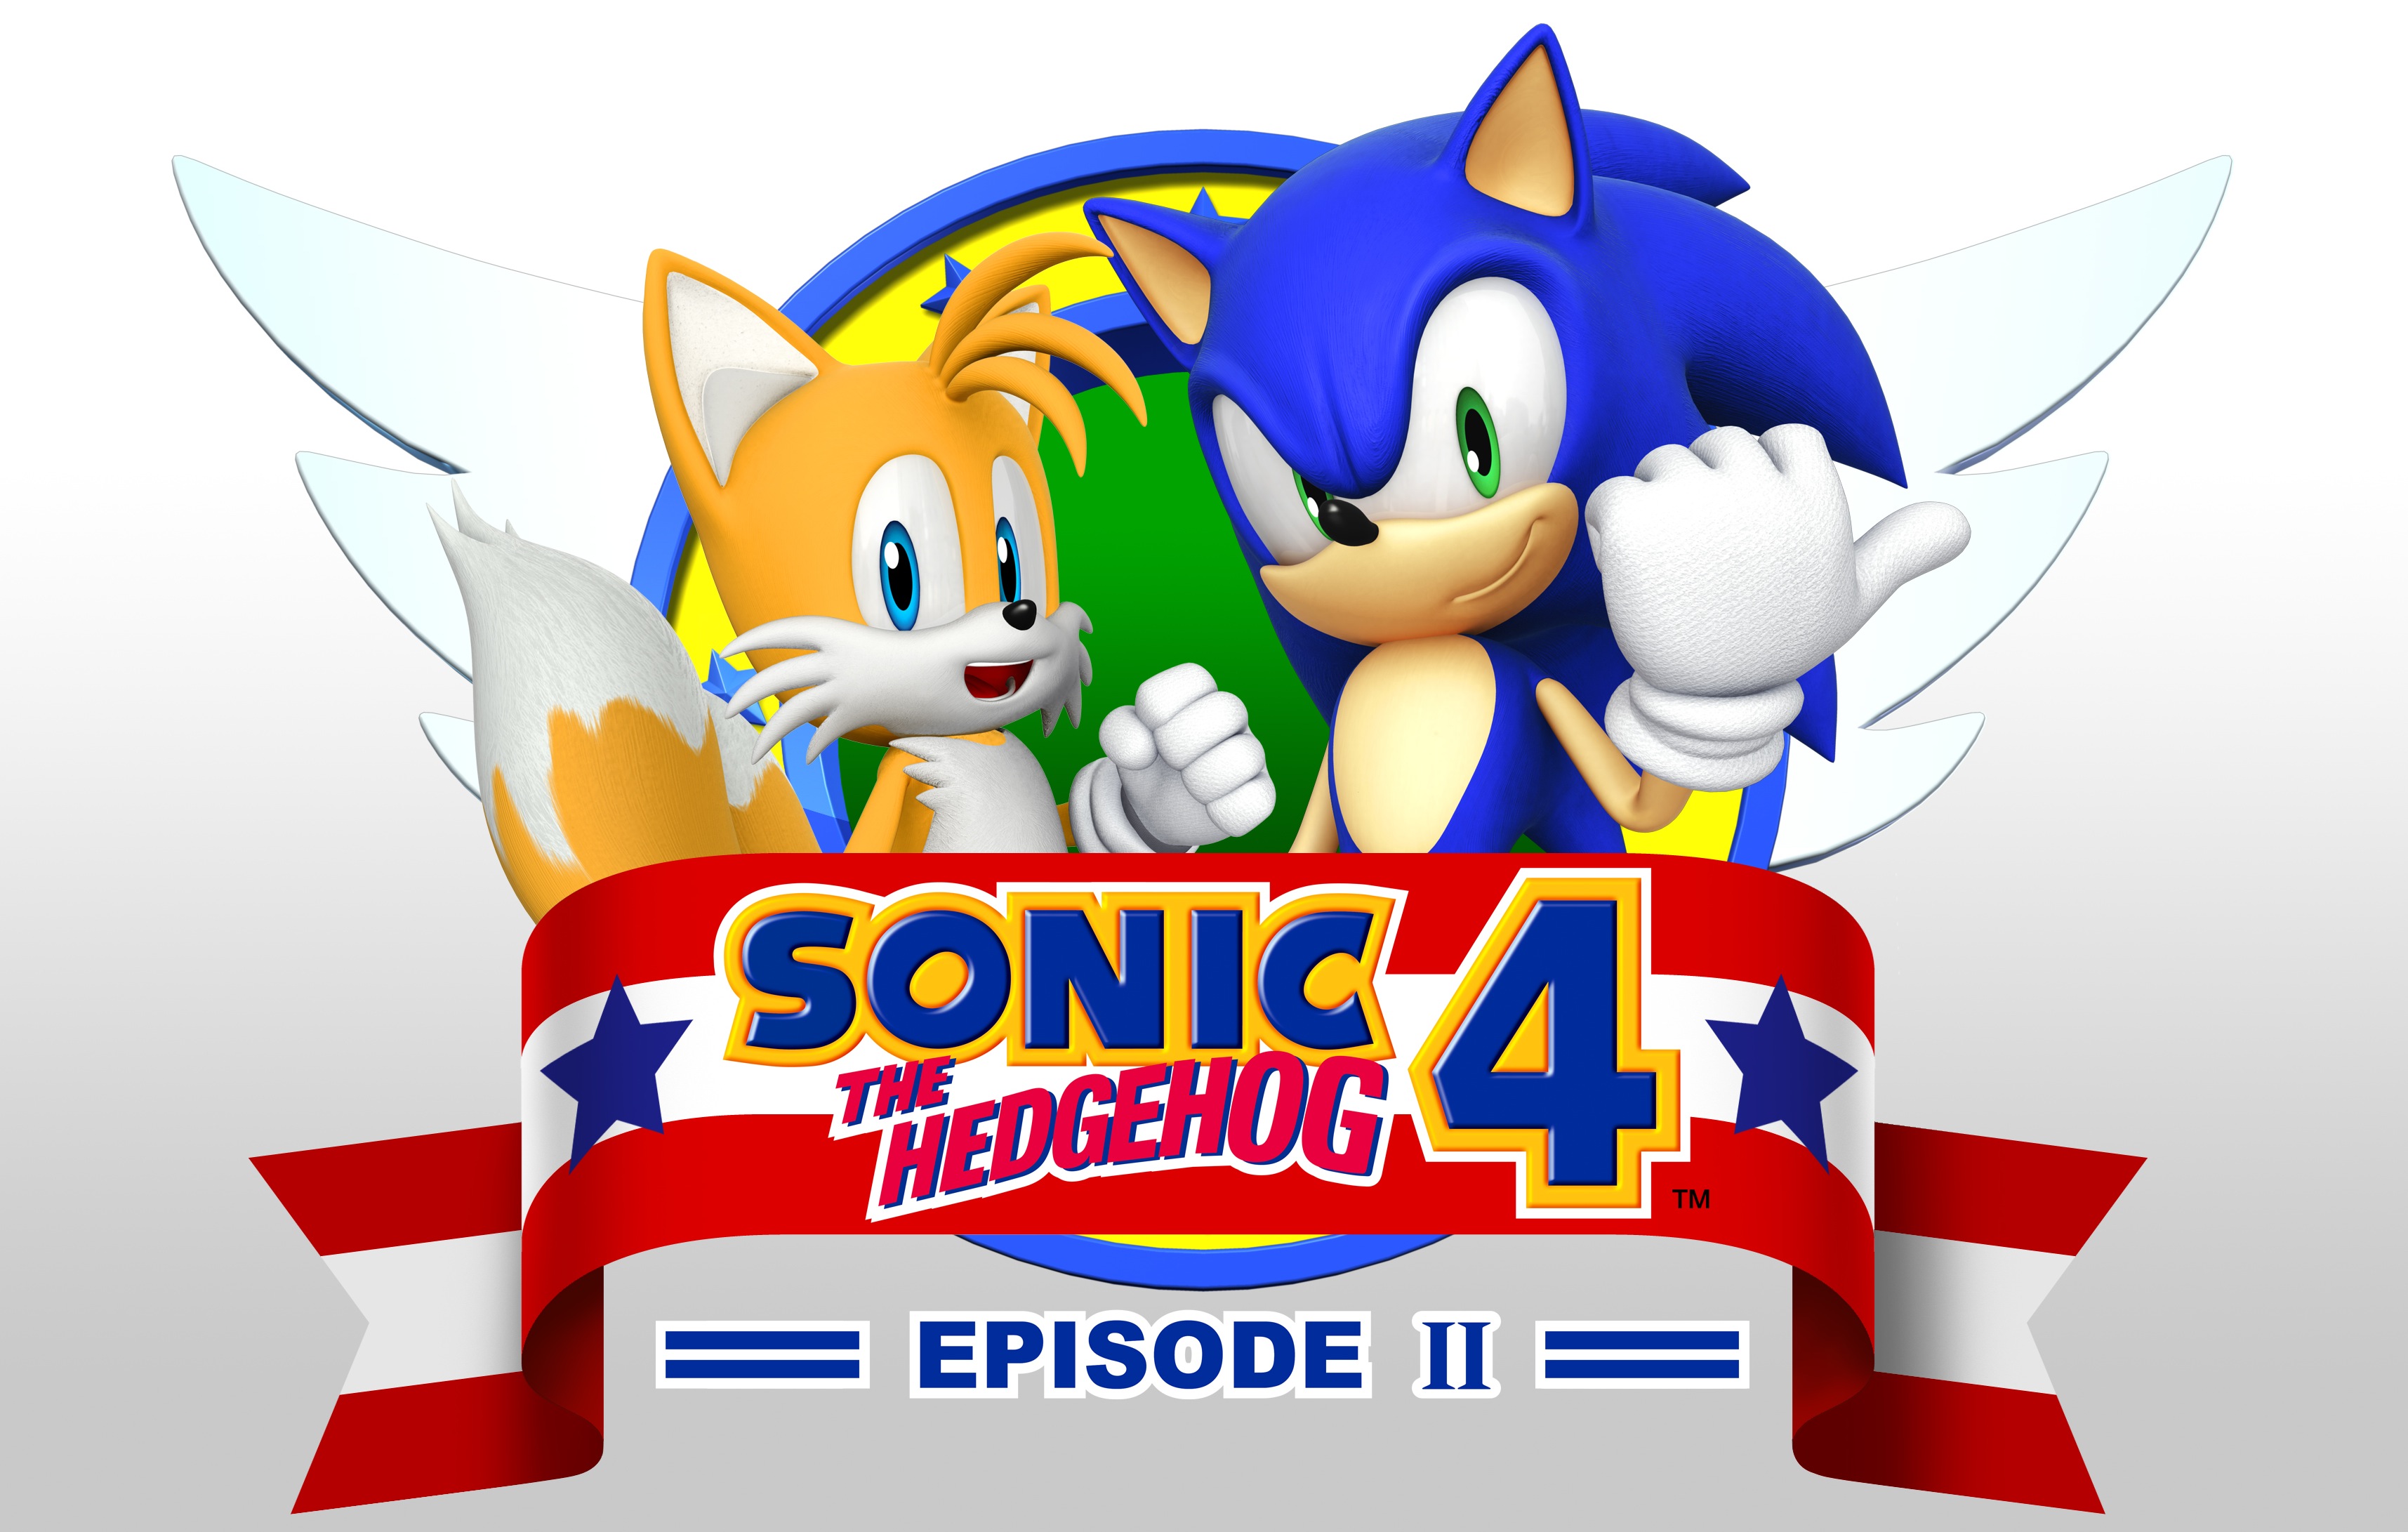 Sonic 4 Episode 2 launches May 16 with free DLC for Episode 1